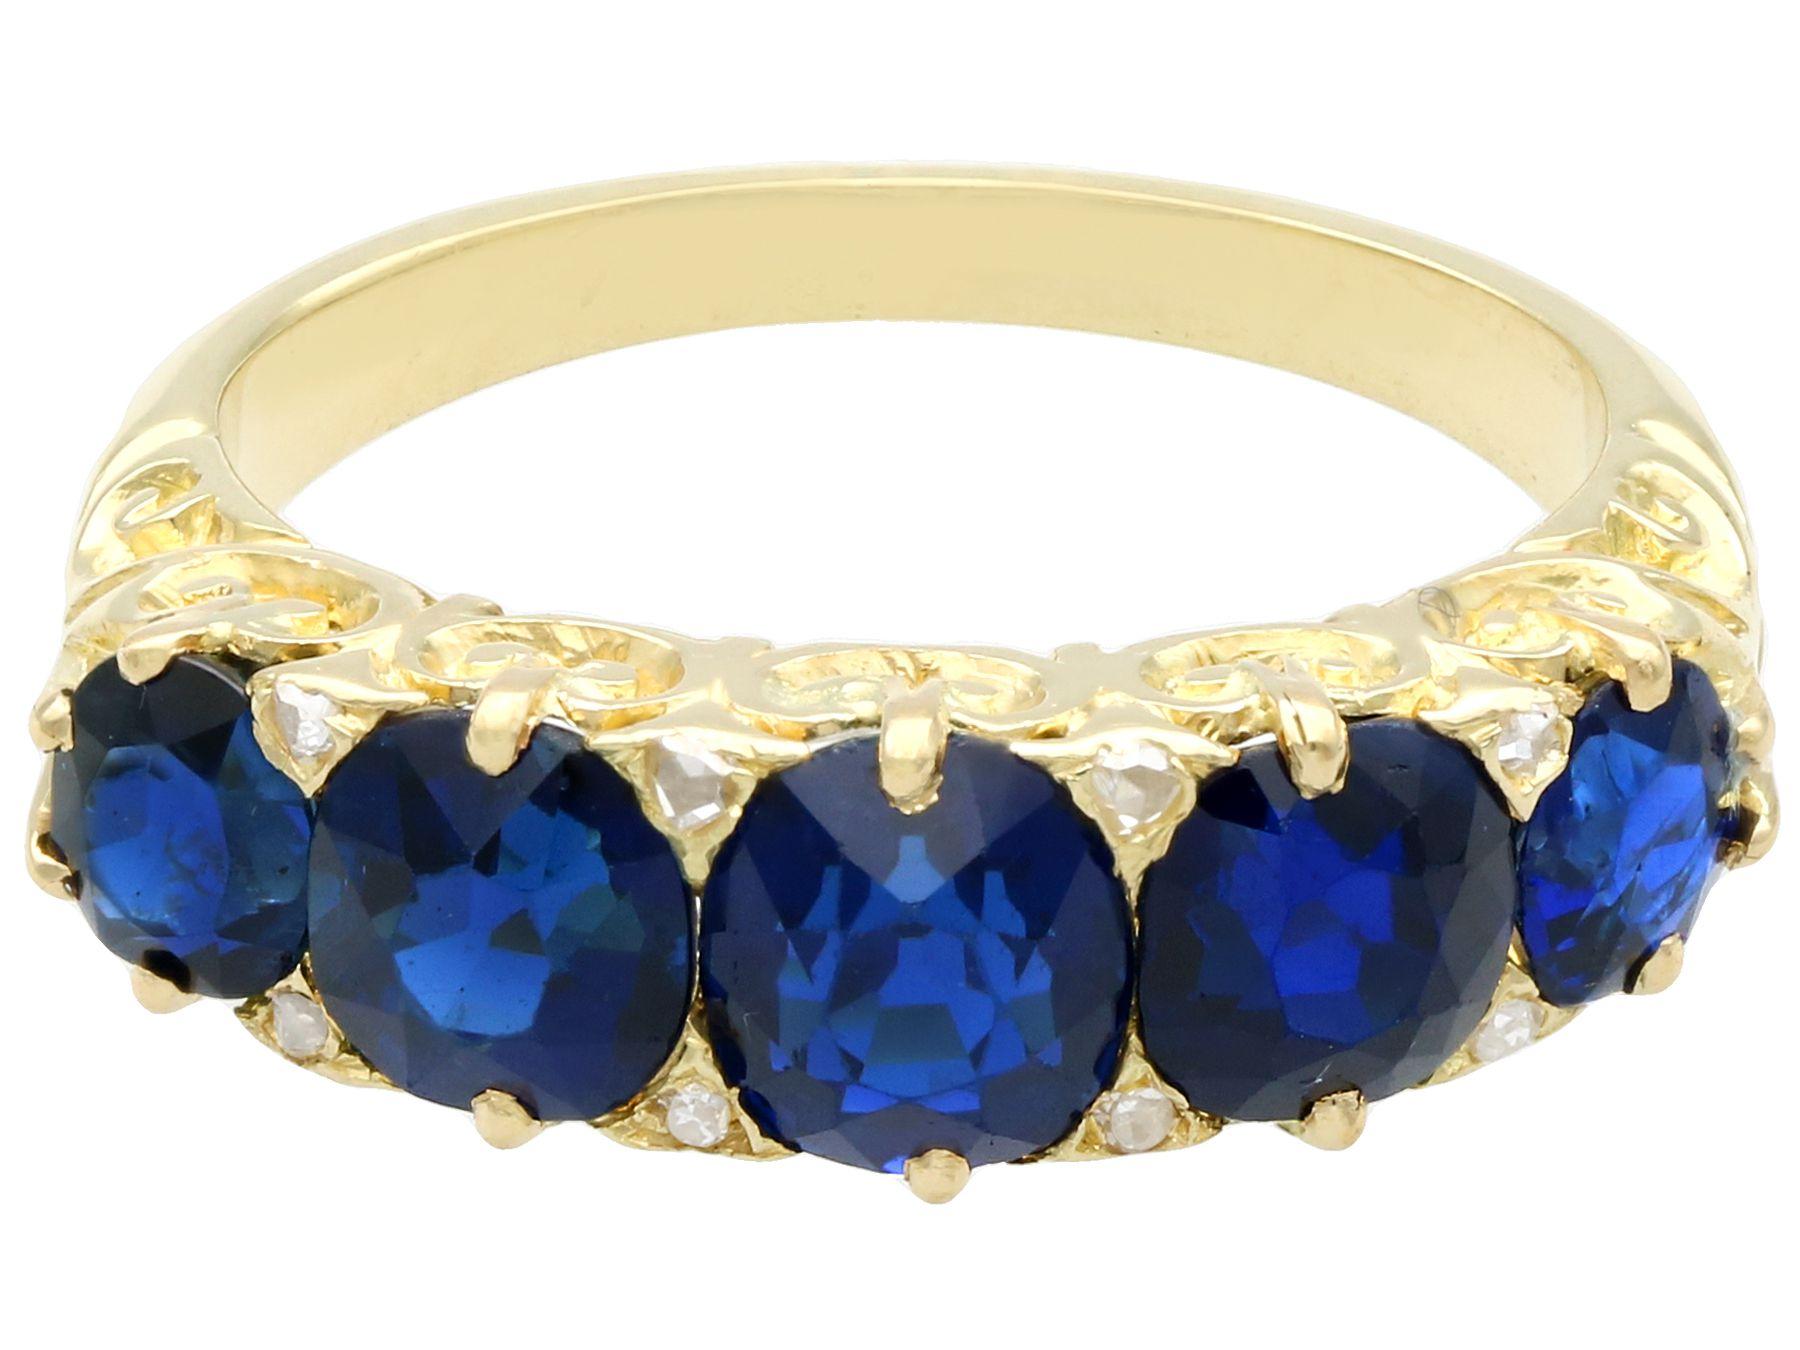 Antique 3.15 Carat Basaltic Sapphire and Diamond Five Stone Ring in Yellow Gold In Excellent Condition For Sale In Jesmond, Newcastle Upon Tyne